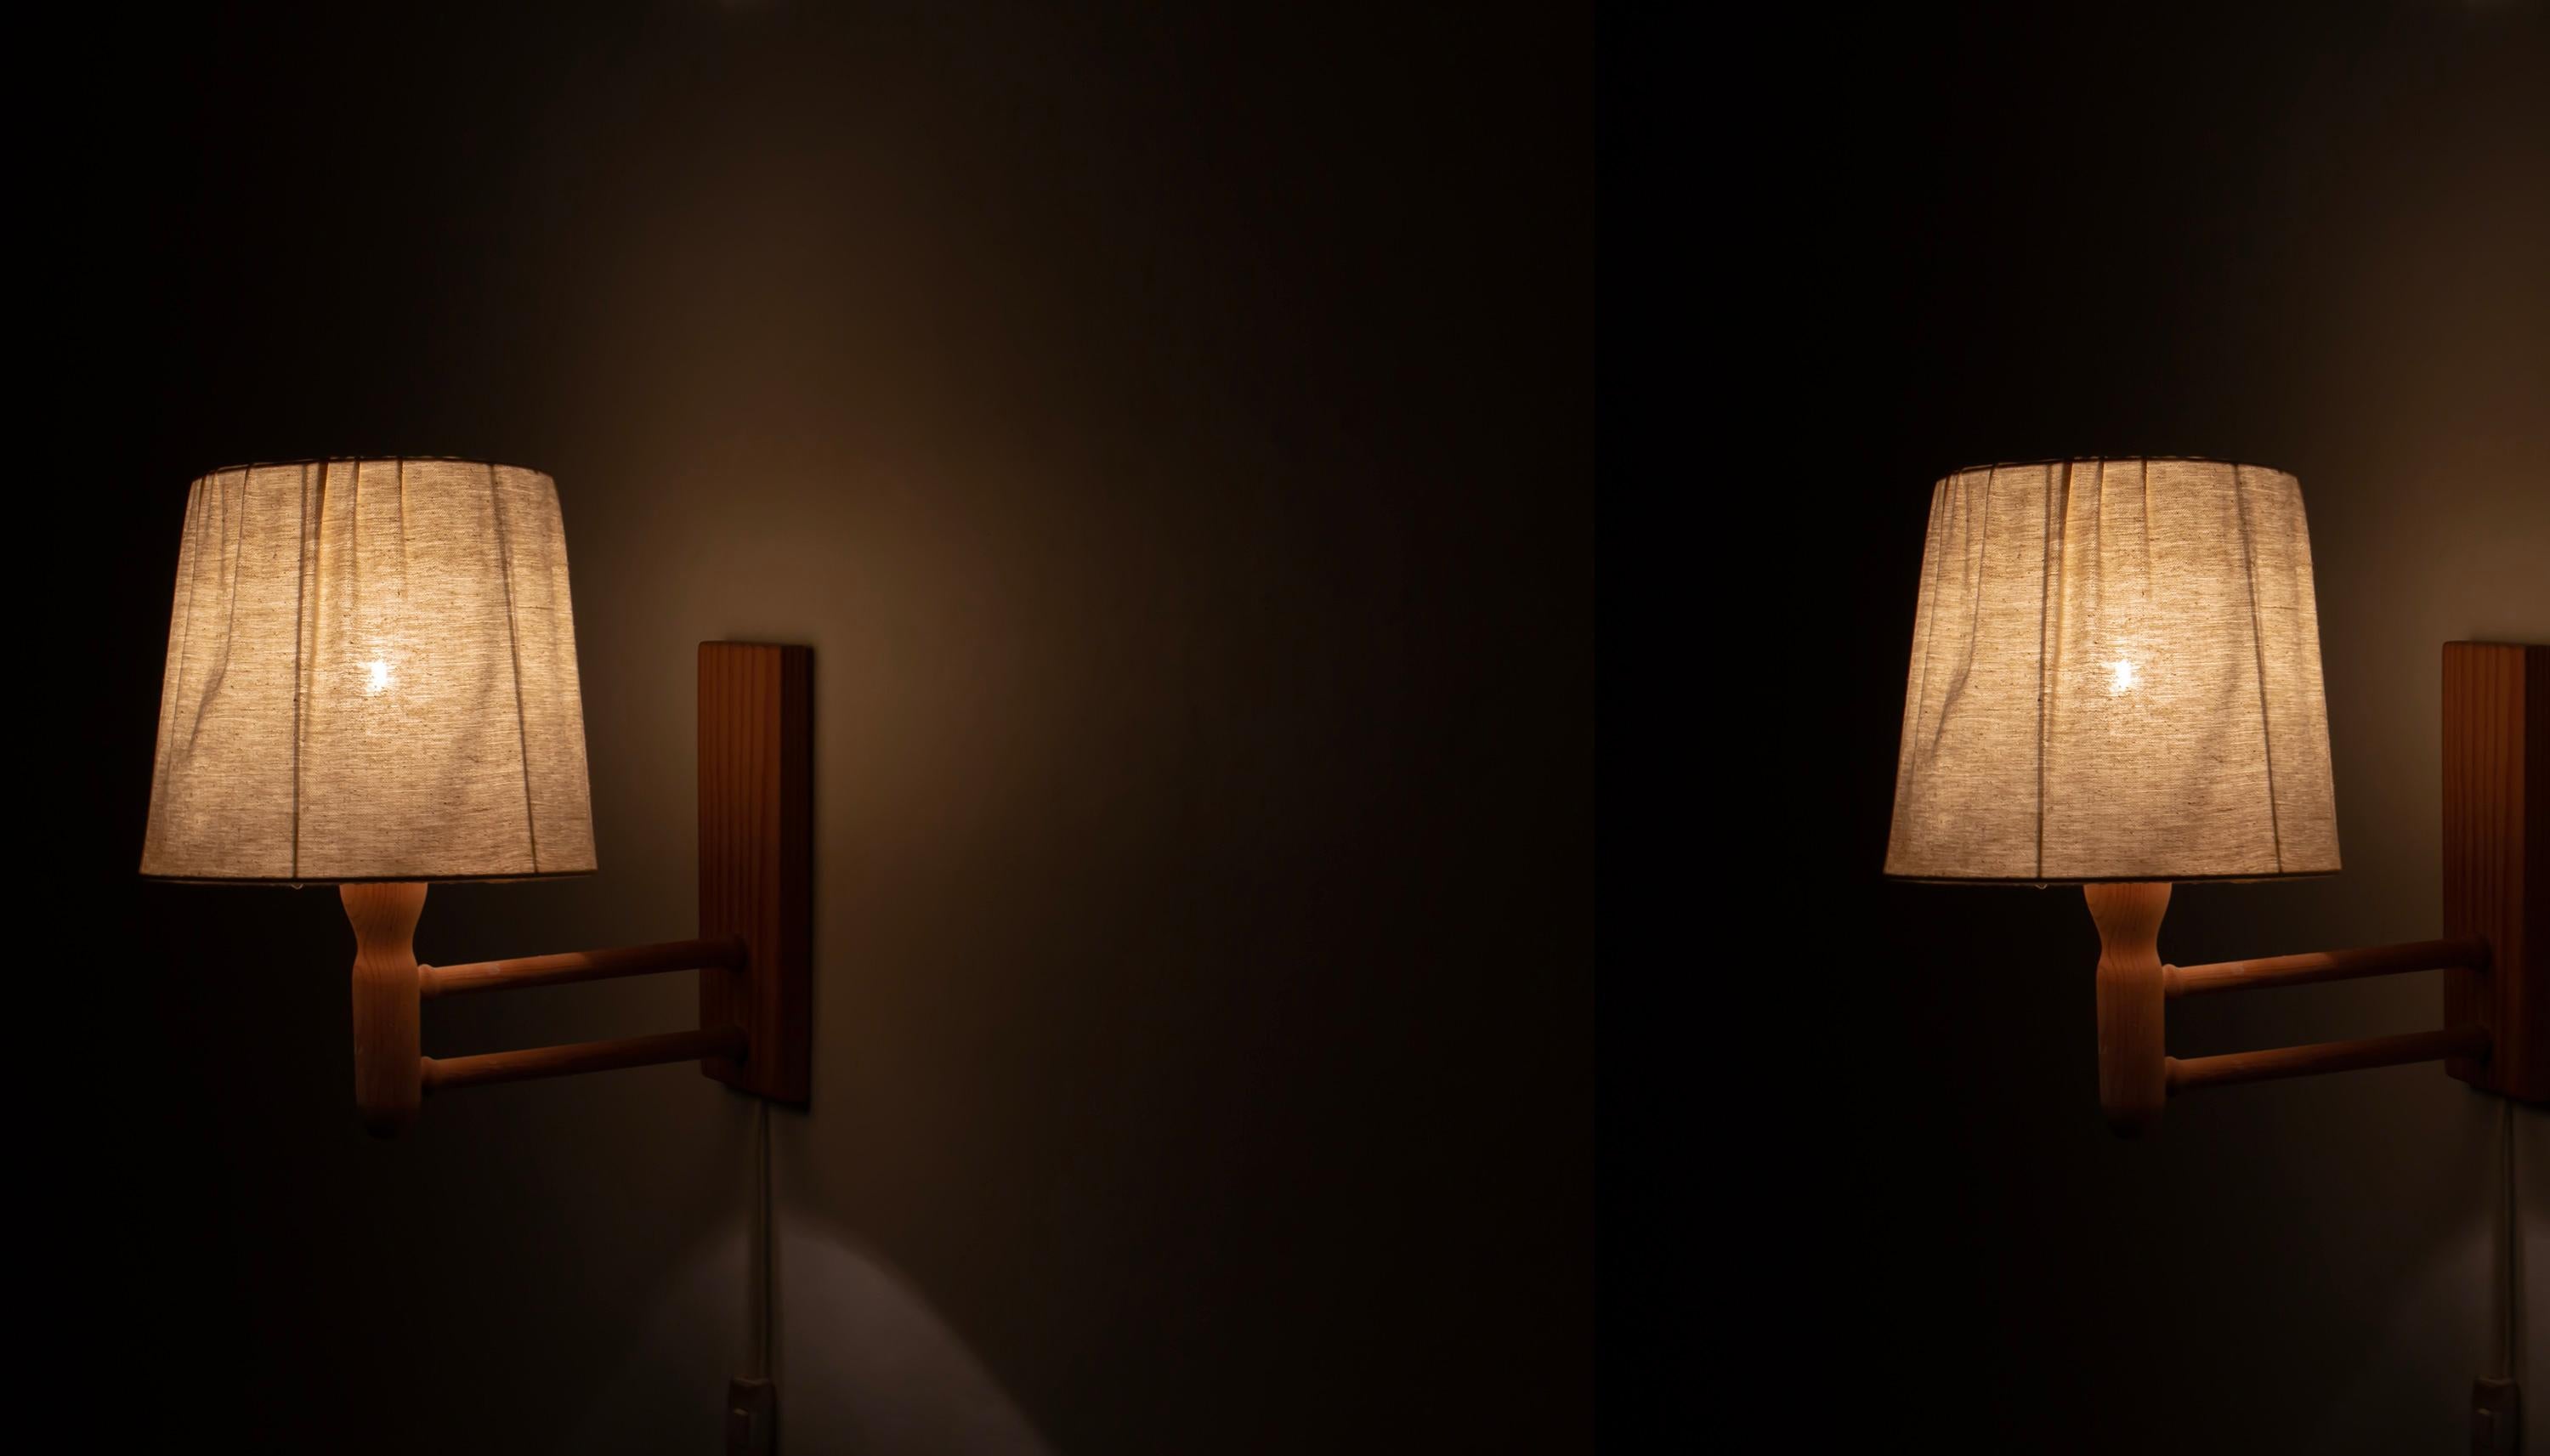 Pair of Wall Lights in Pine, Norway, 1960s For Sale 3